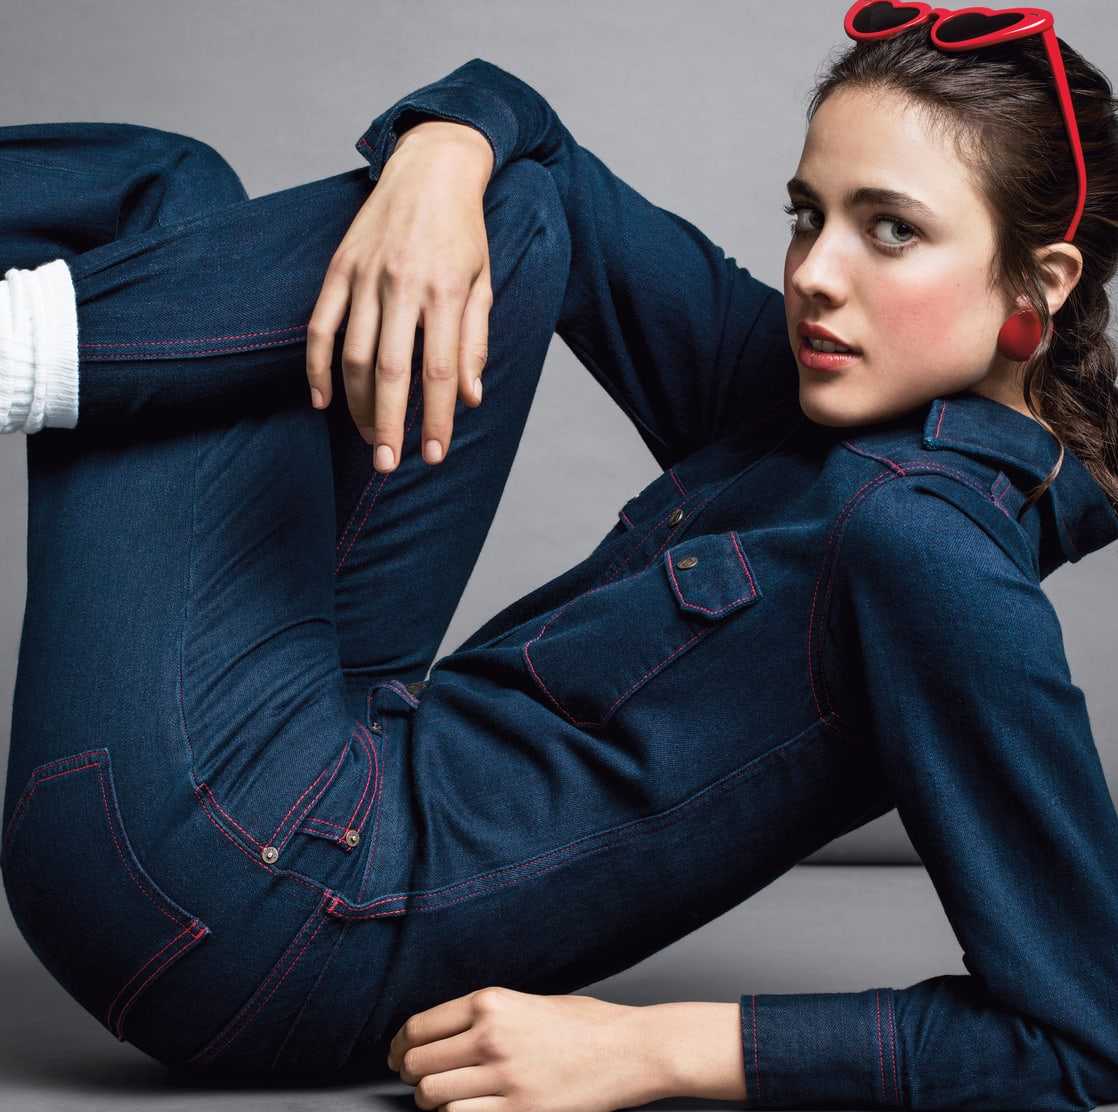 75+ Hot Pictures Of Margaret Qualley Will Drive You Insane For Her | Best Of Comic Books